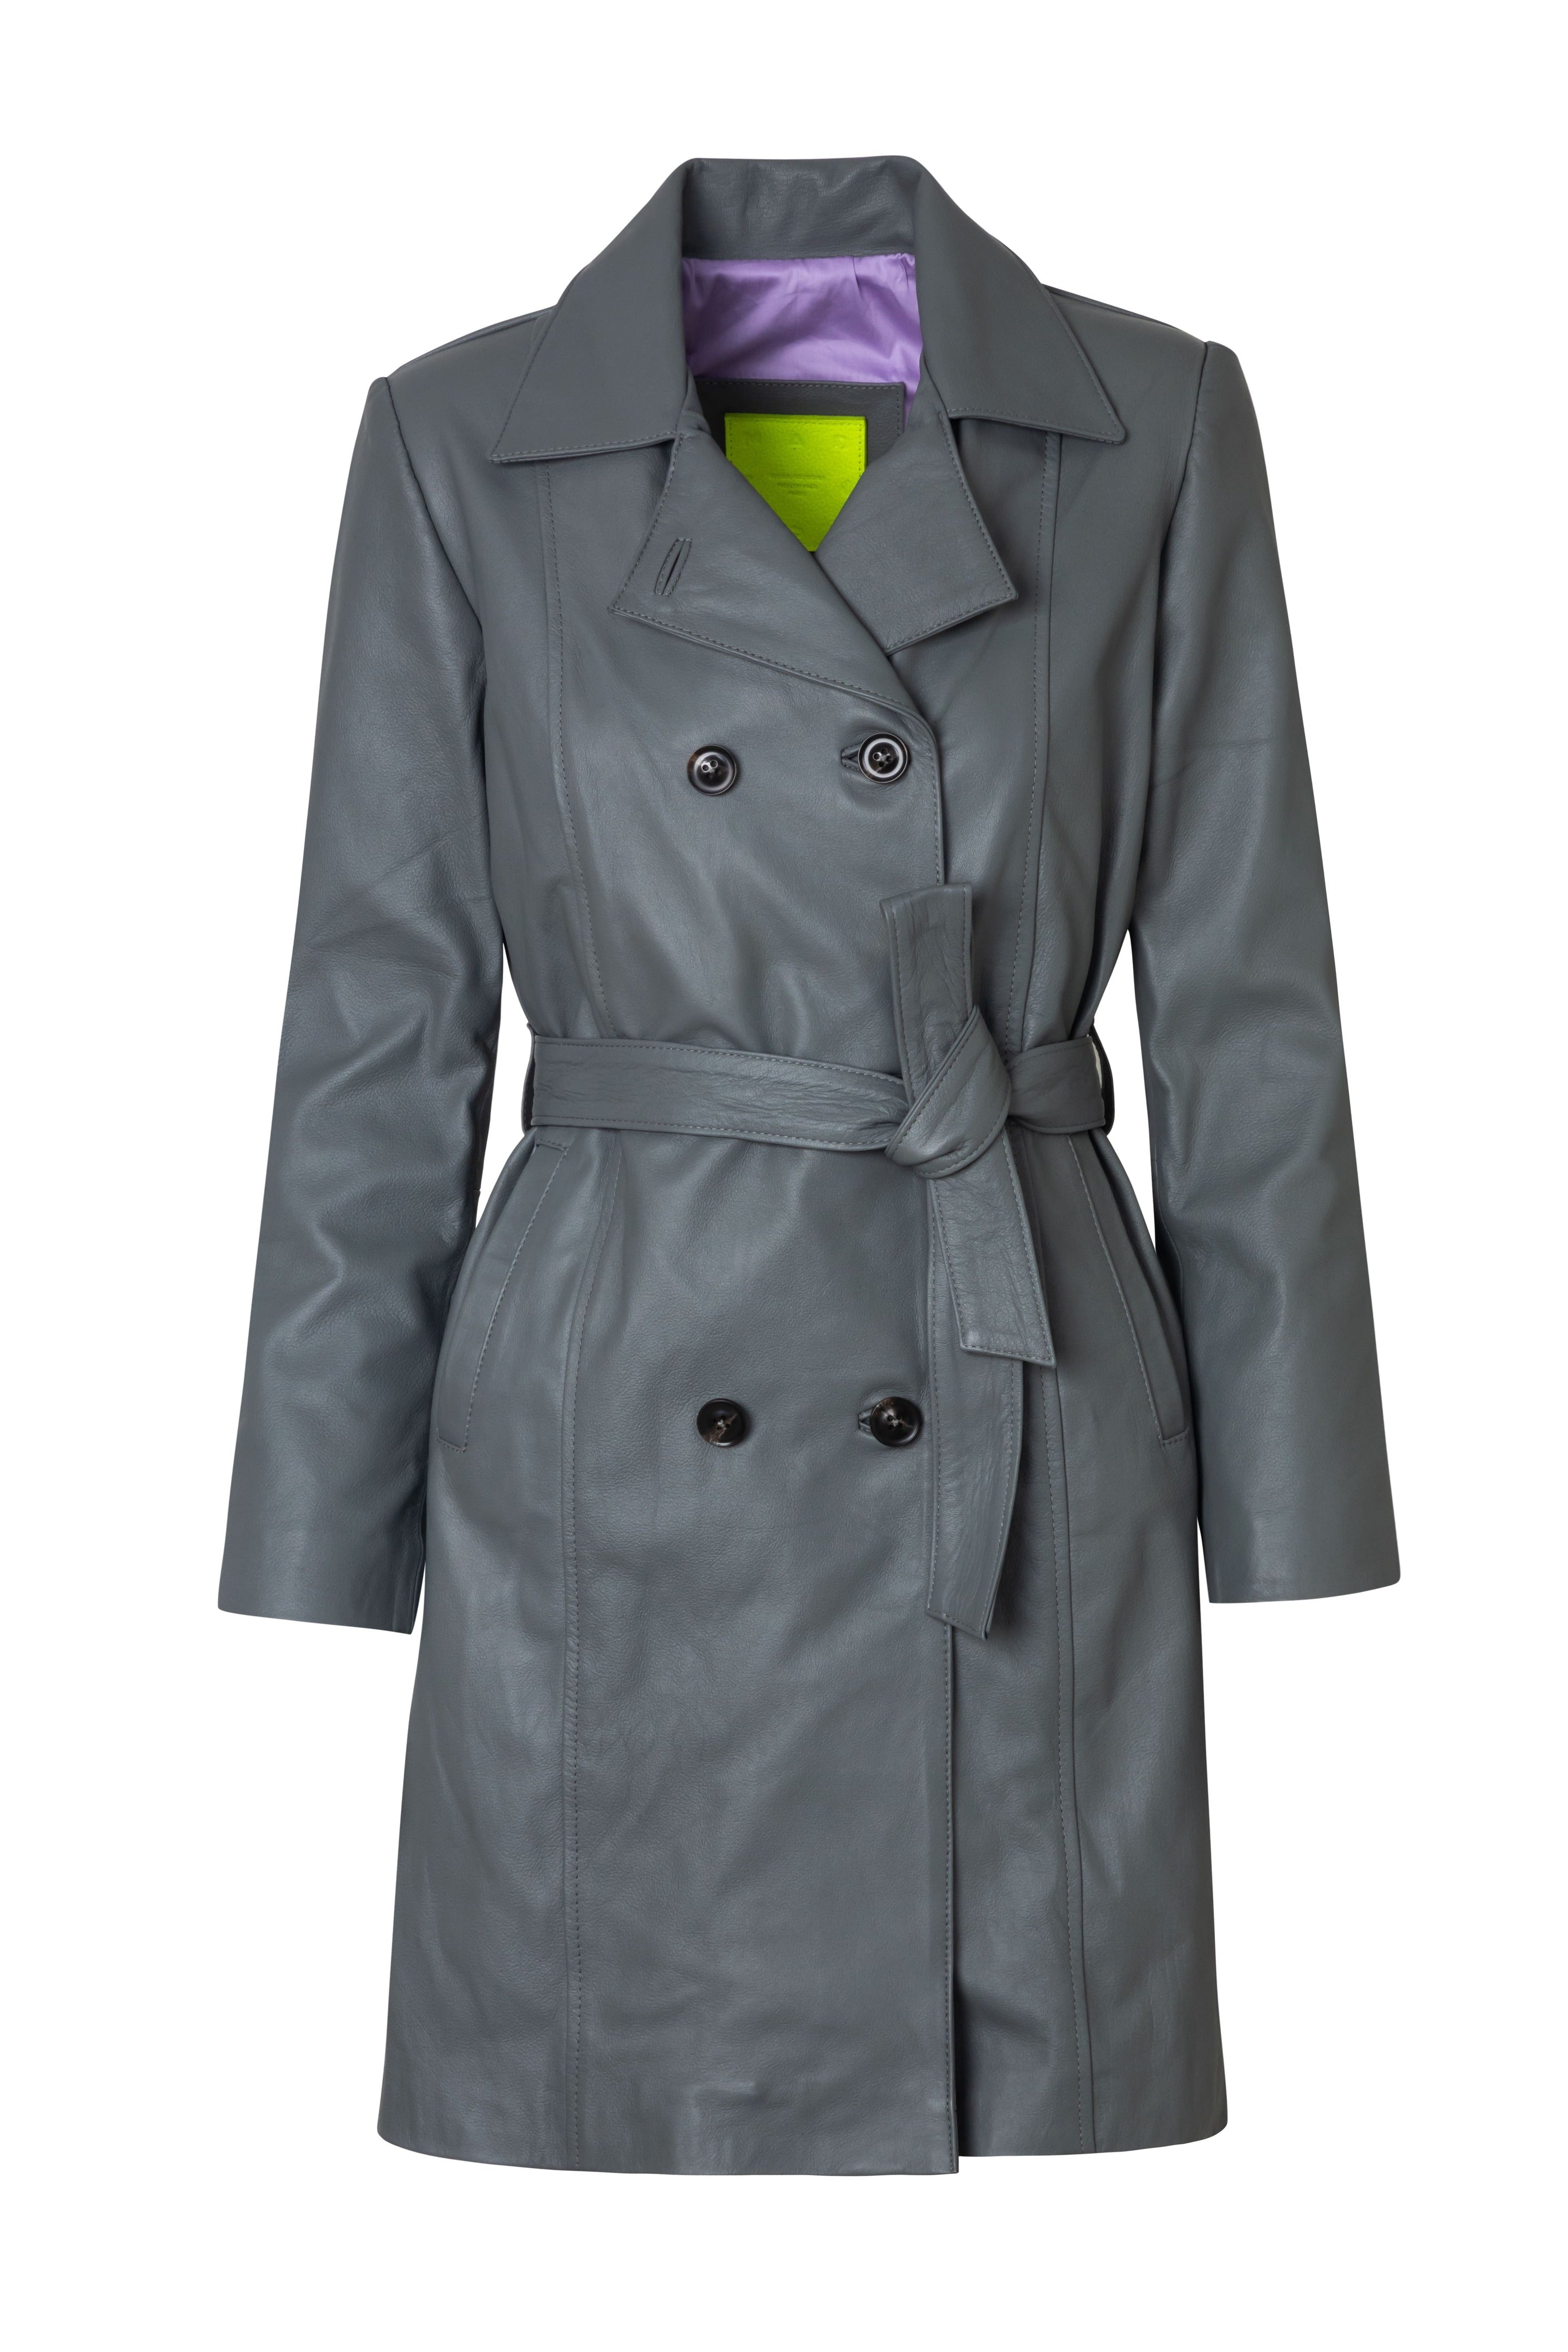 TRENCH coat - GREY - the PERFECT dose OF madness - DIVINA CASTIDAD